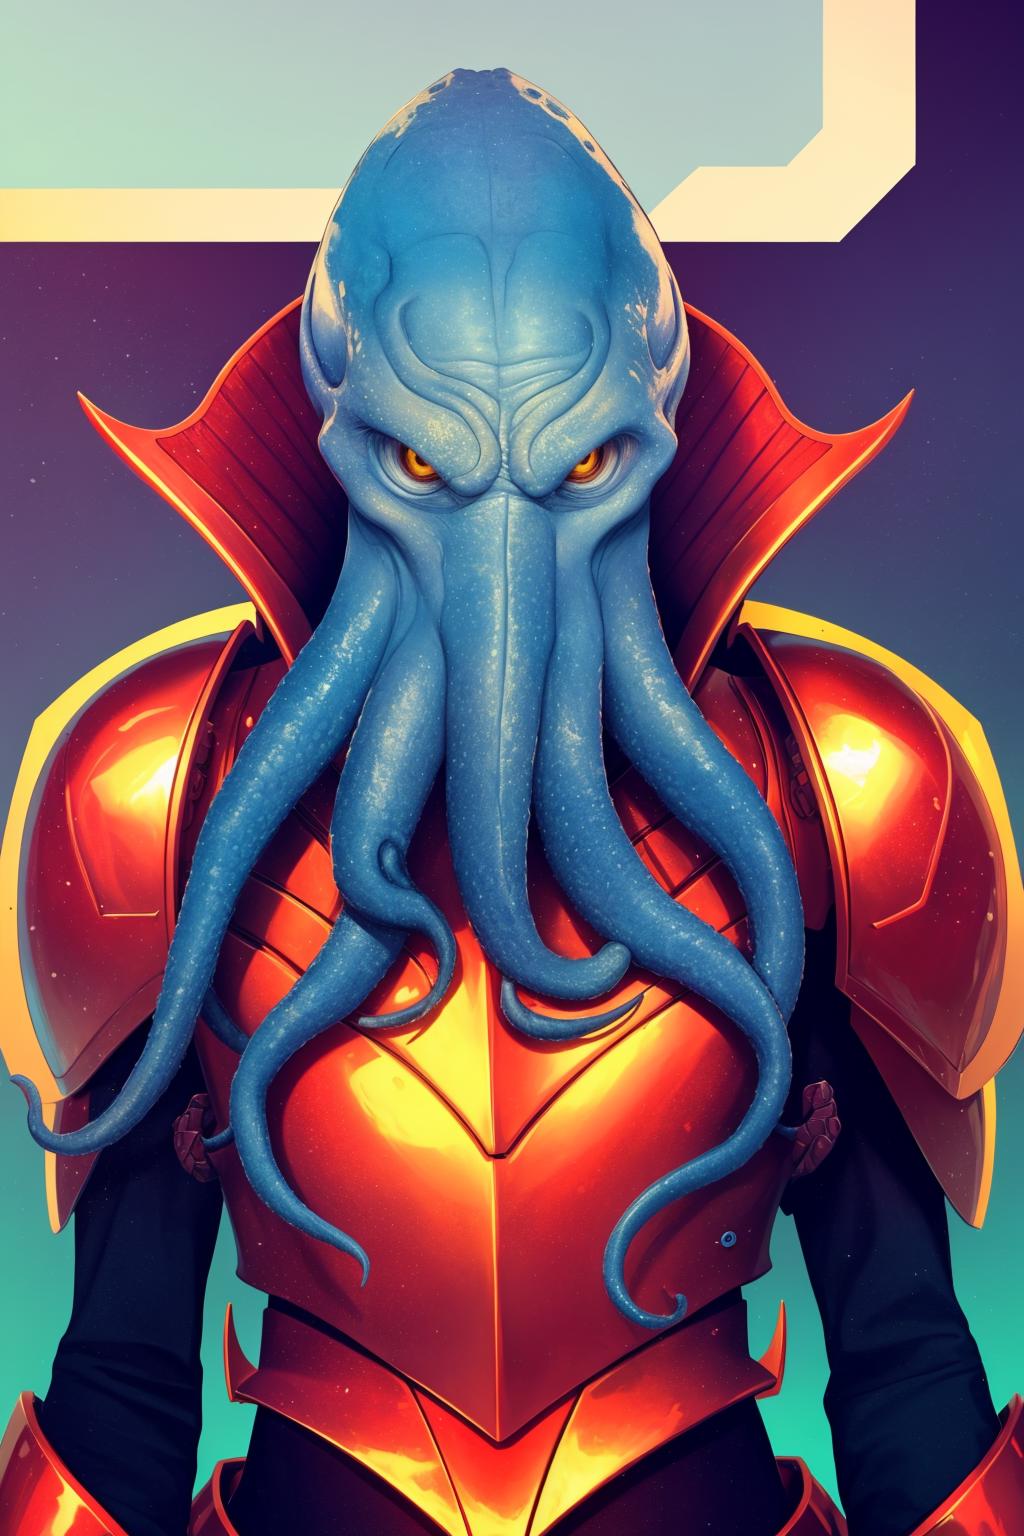 Mind Flayer (illithid) lora image by fitCorder